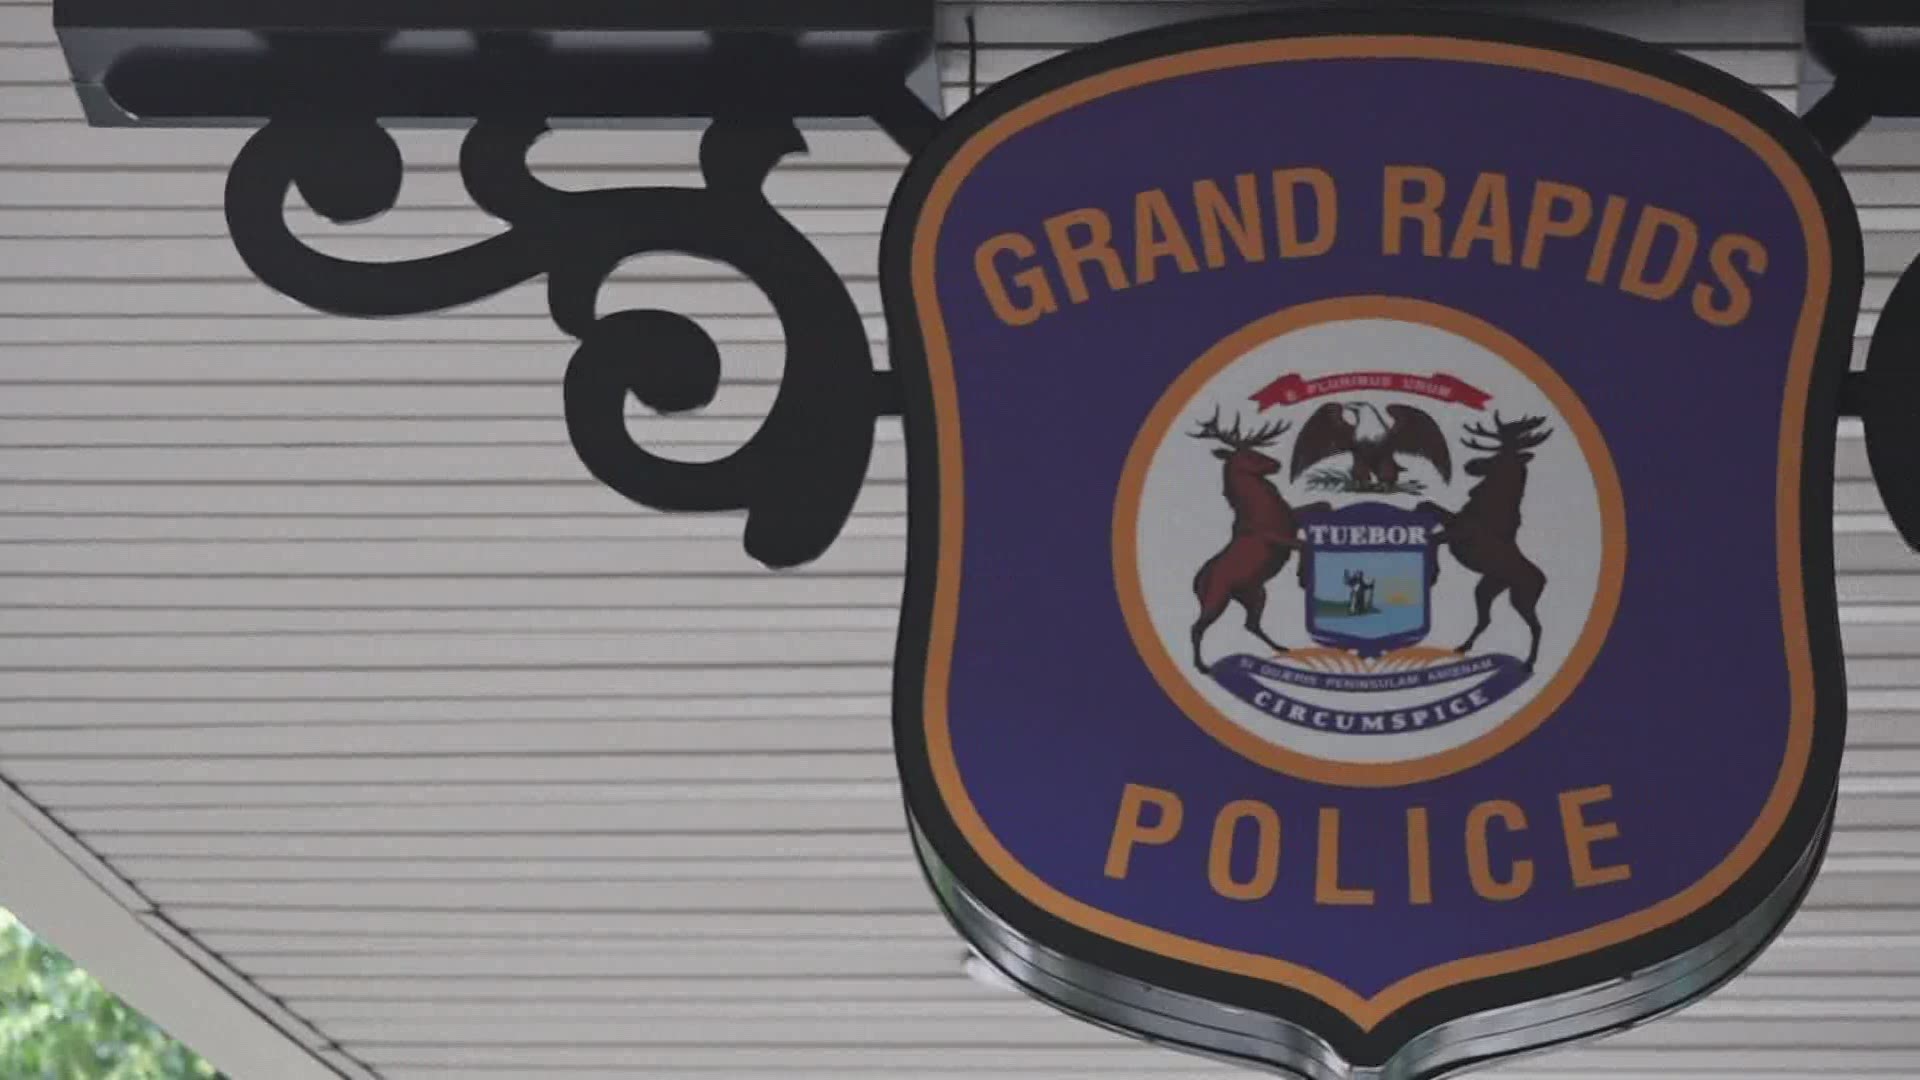 GRPD has released a 3 year plan to transform policing in the Grand Rapids area.